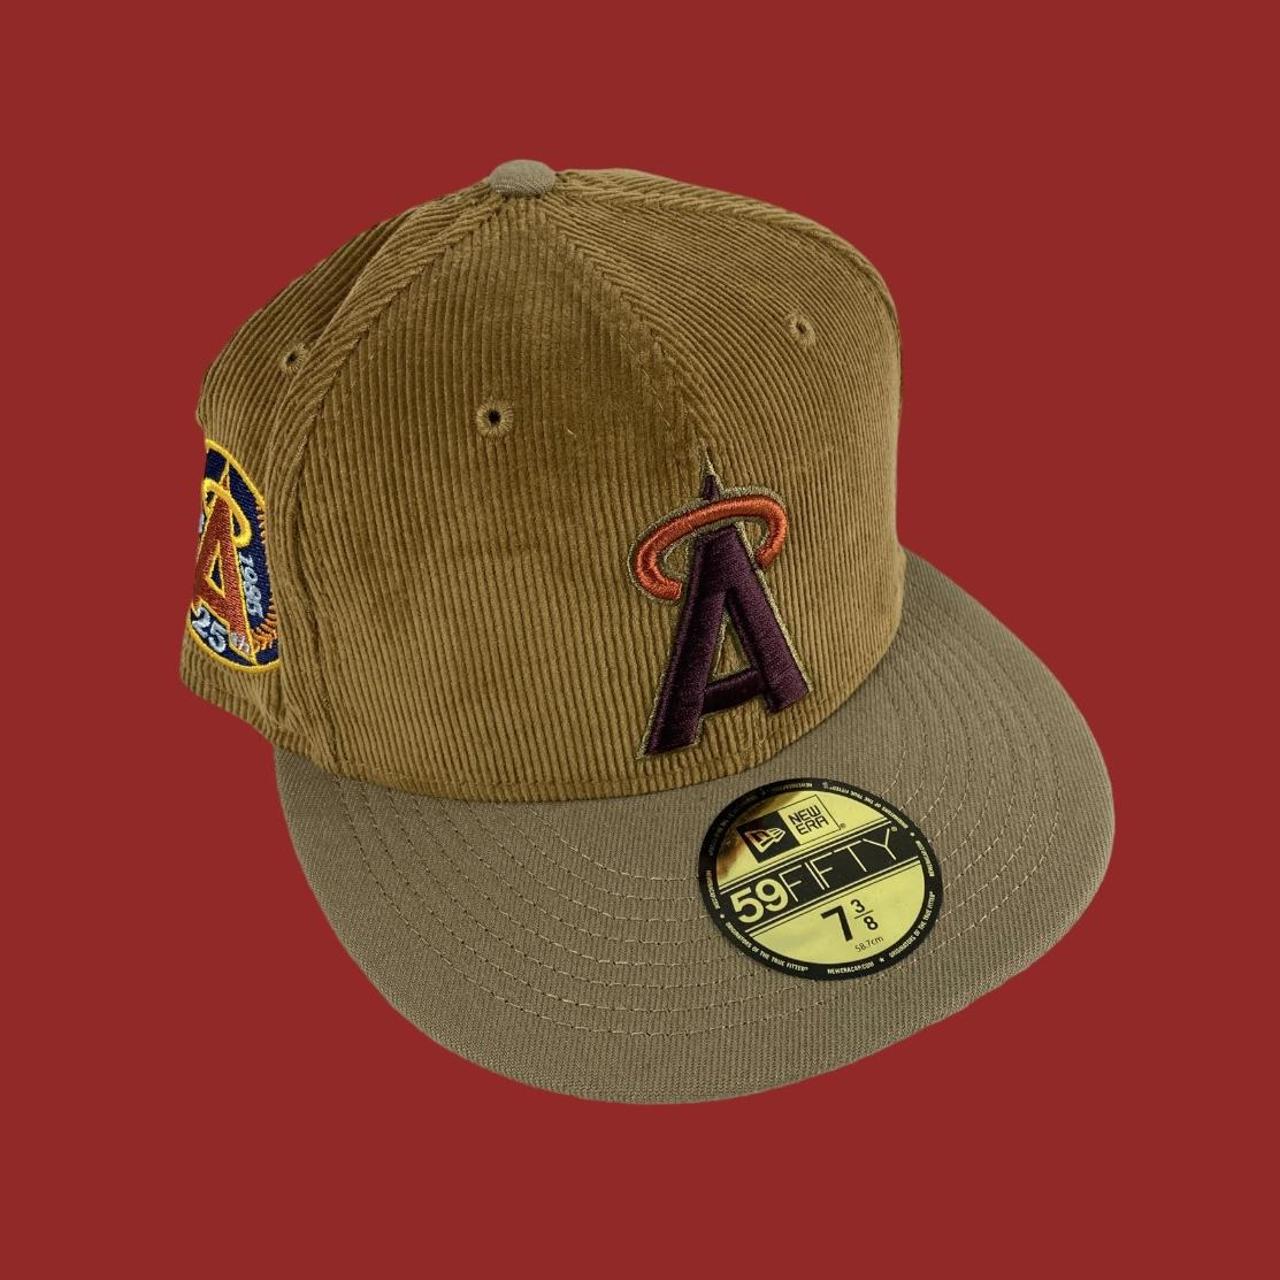 New Era Los Angeles Angels 25th Anniversary Patch Fitted Hat Gold/Brown